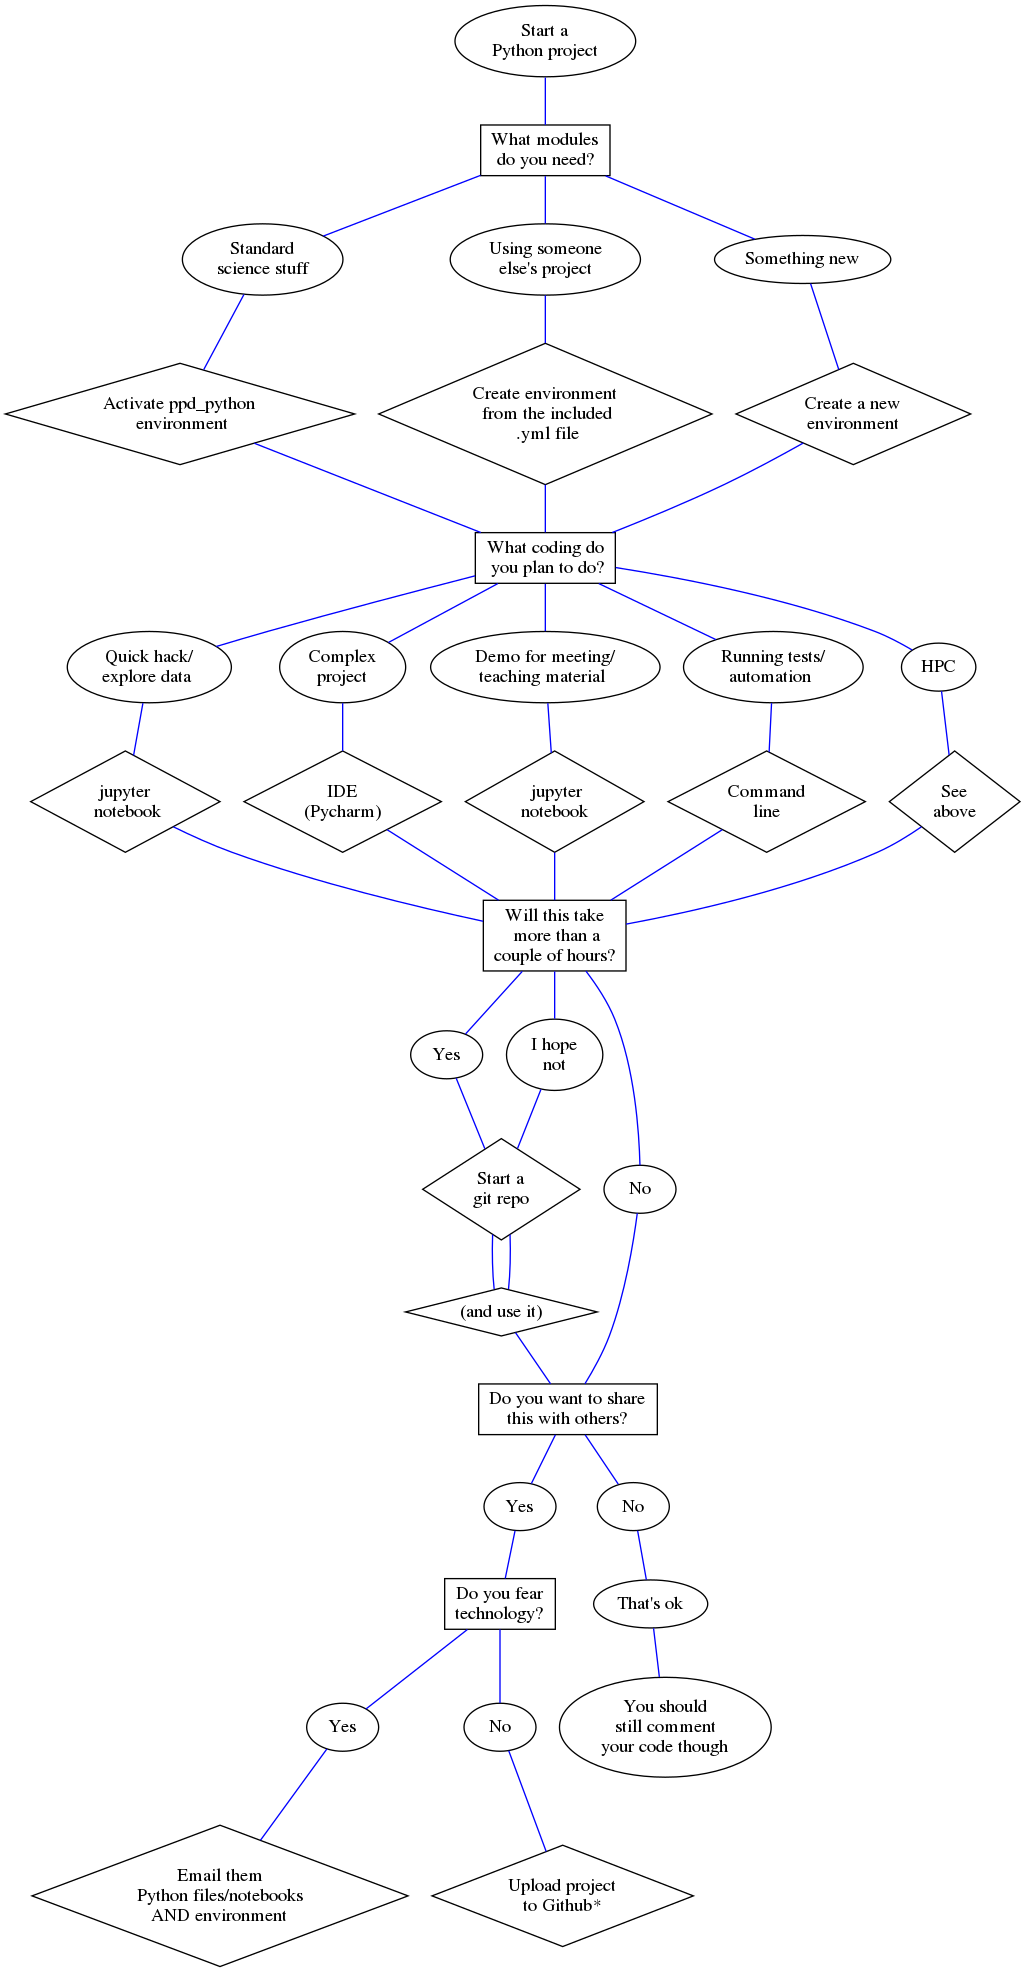 Masterful flow chart of Python decision making